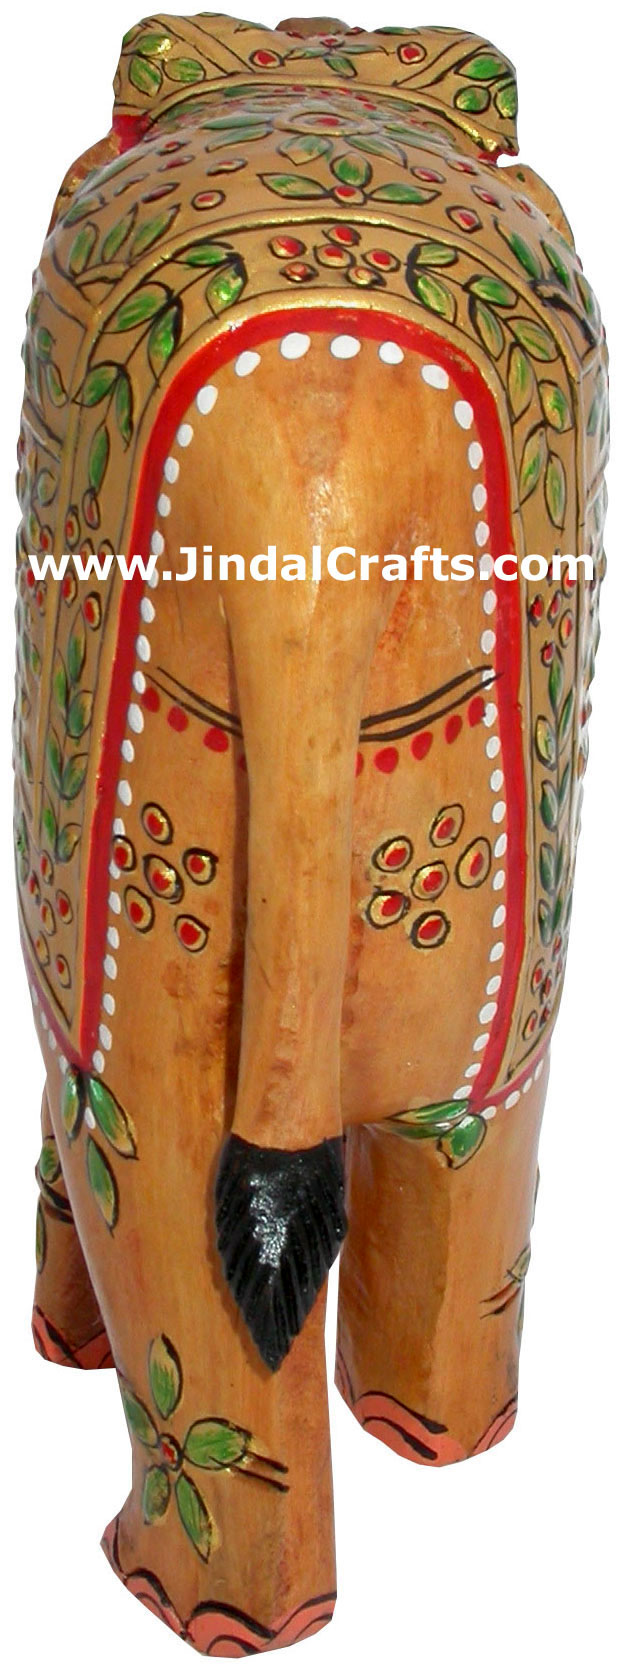 Hand Carved Hand Painted Embossed Royal Elephant India Wood Handicrafts Art Gift